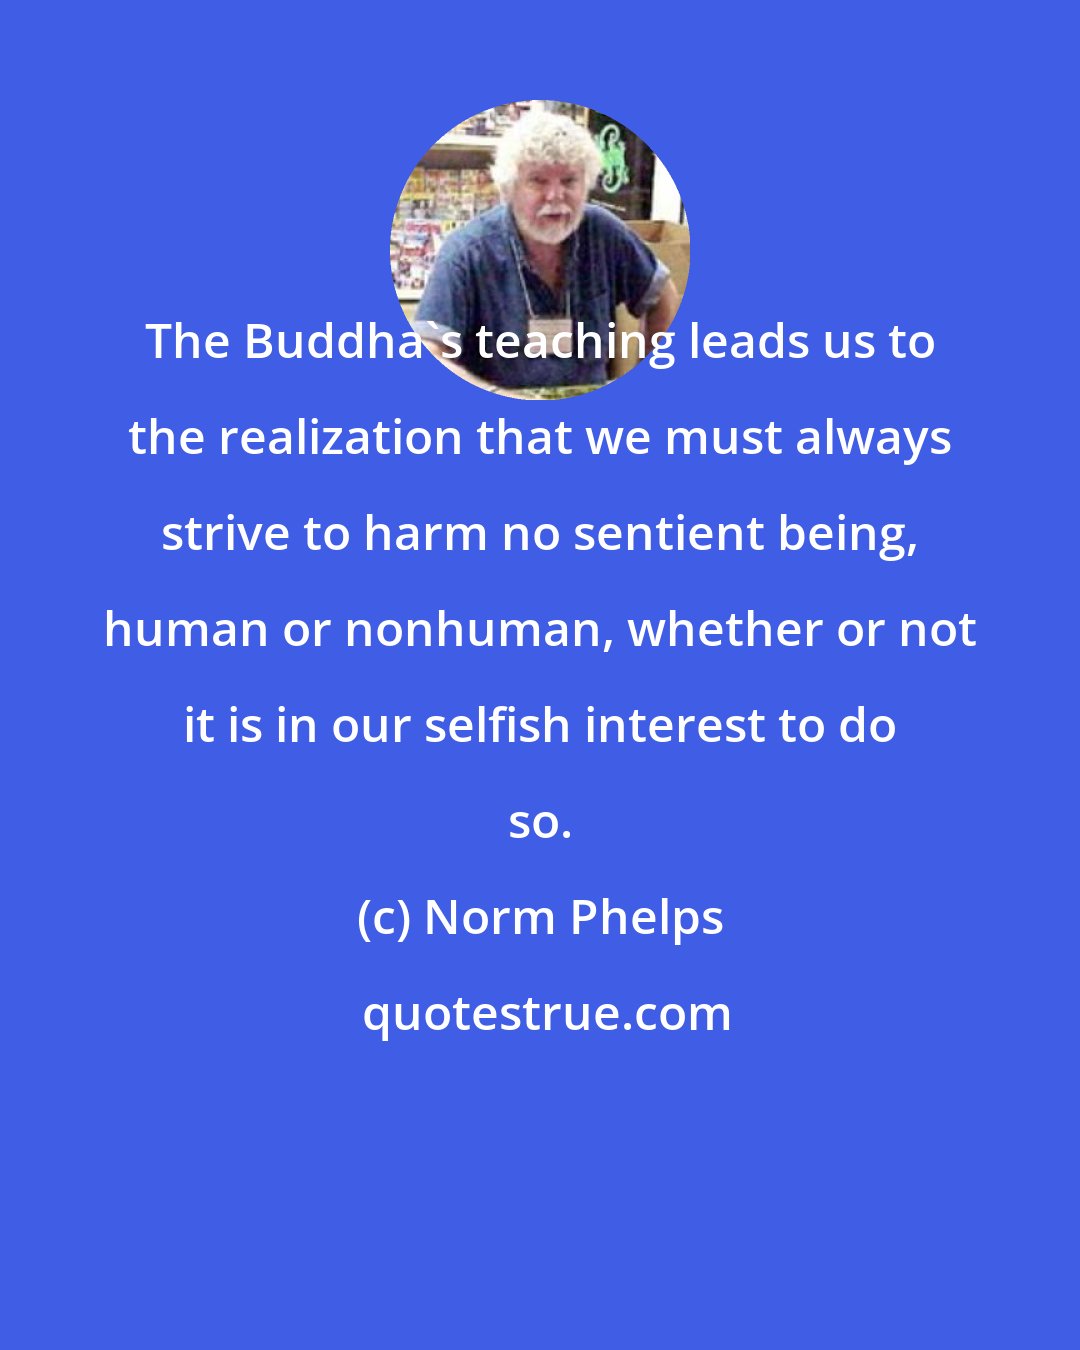 Norm Phelps: The Buddha's teaching leads us to the realization that we must always strive to harm no sentient being, human or nonhuman, whether or not it is in our selfish interest to do so.